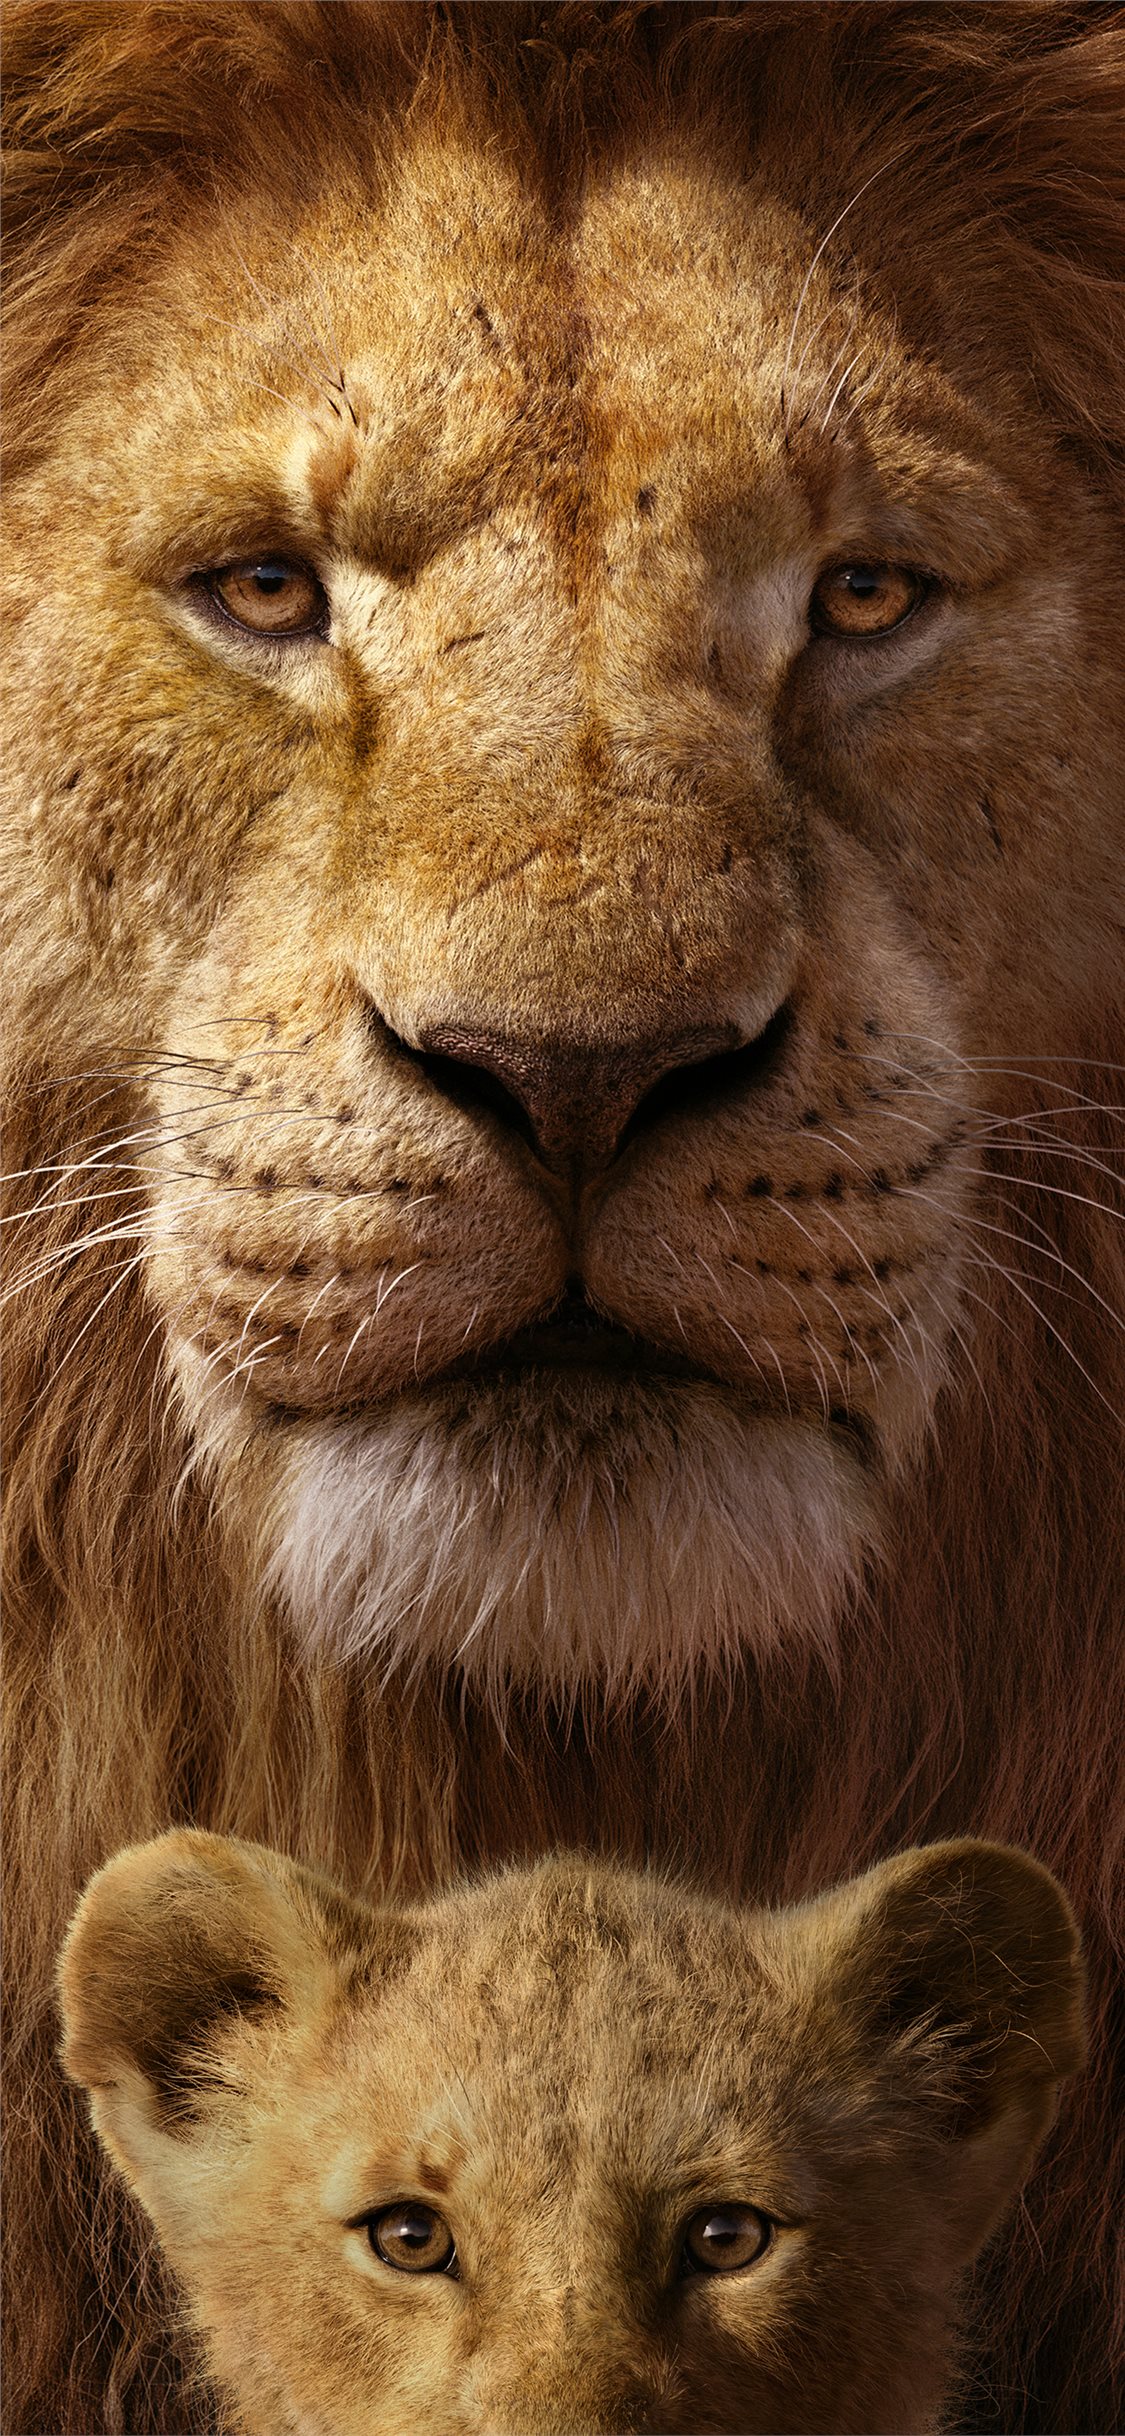 The Lion King 8k iPhone Wallpaper